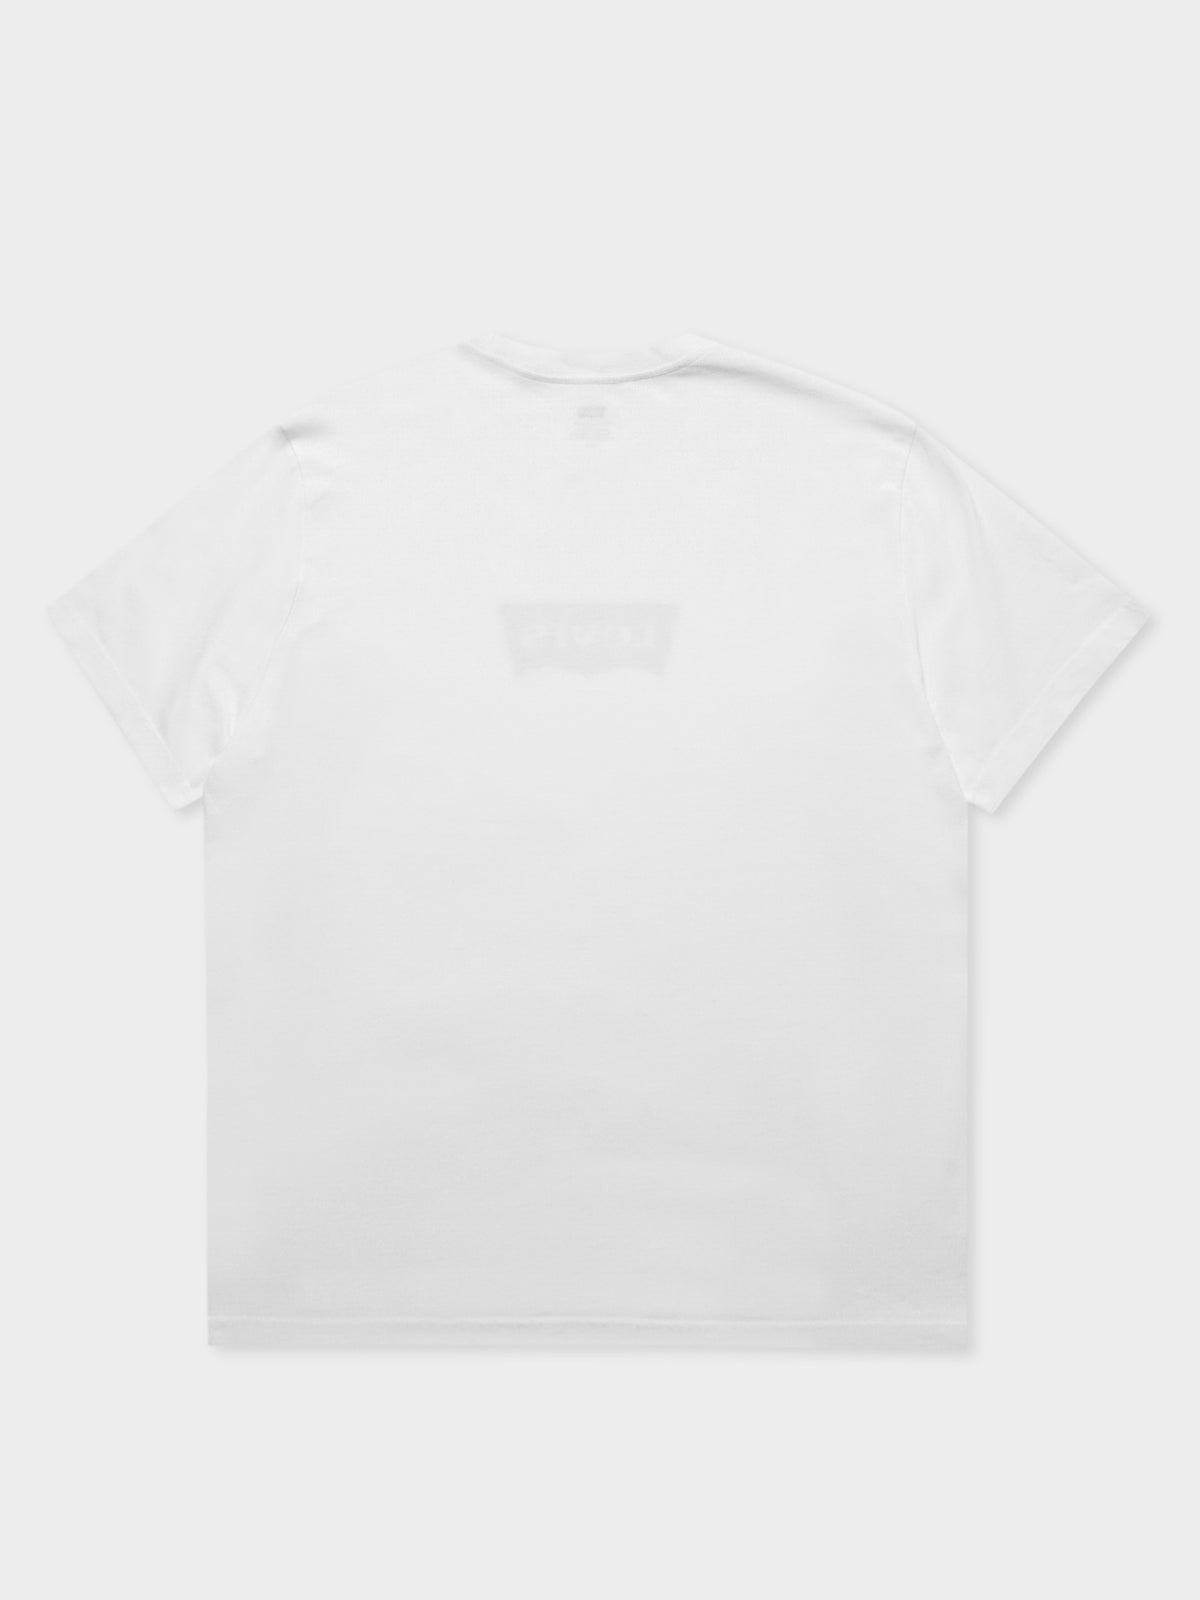 Relaxed Graphic T-Shirt in White